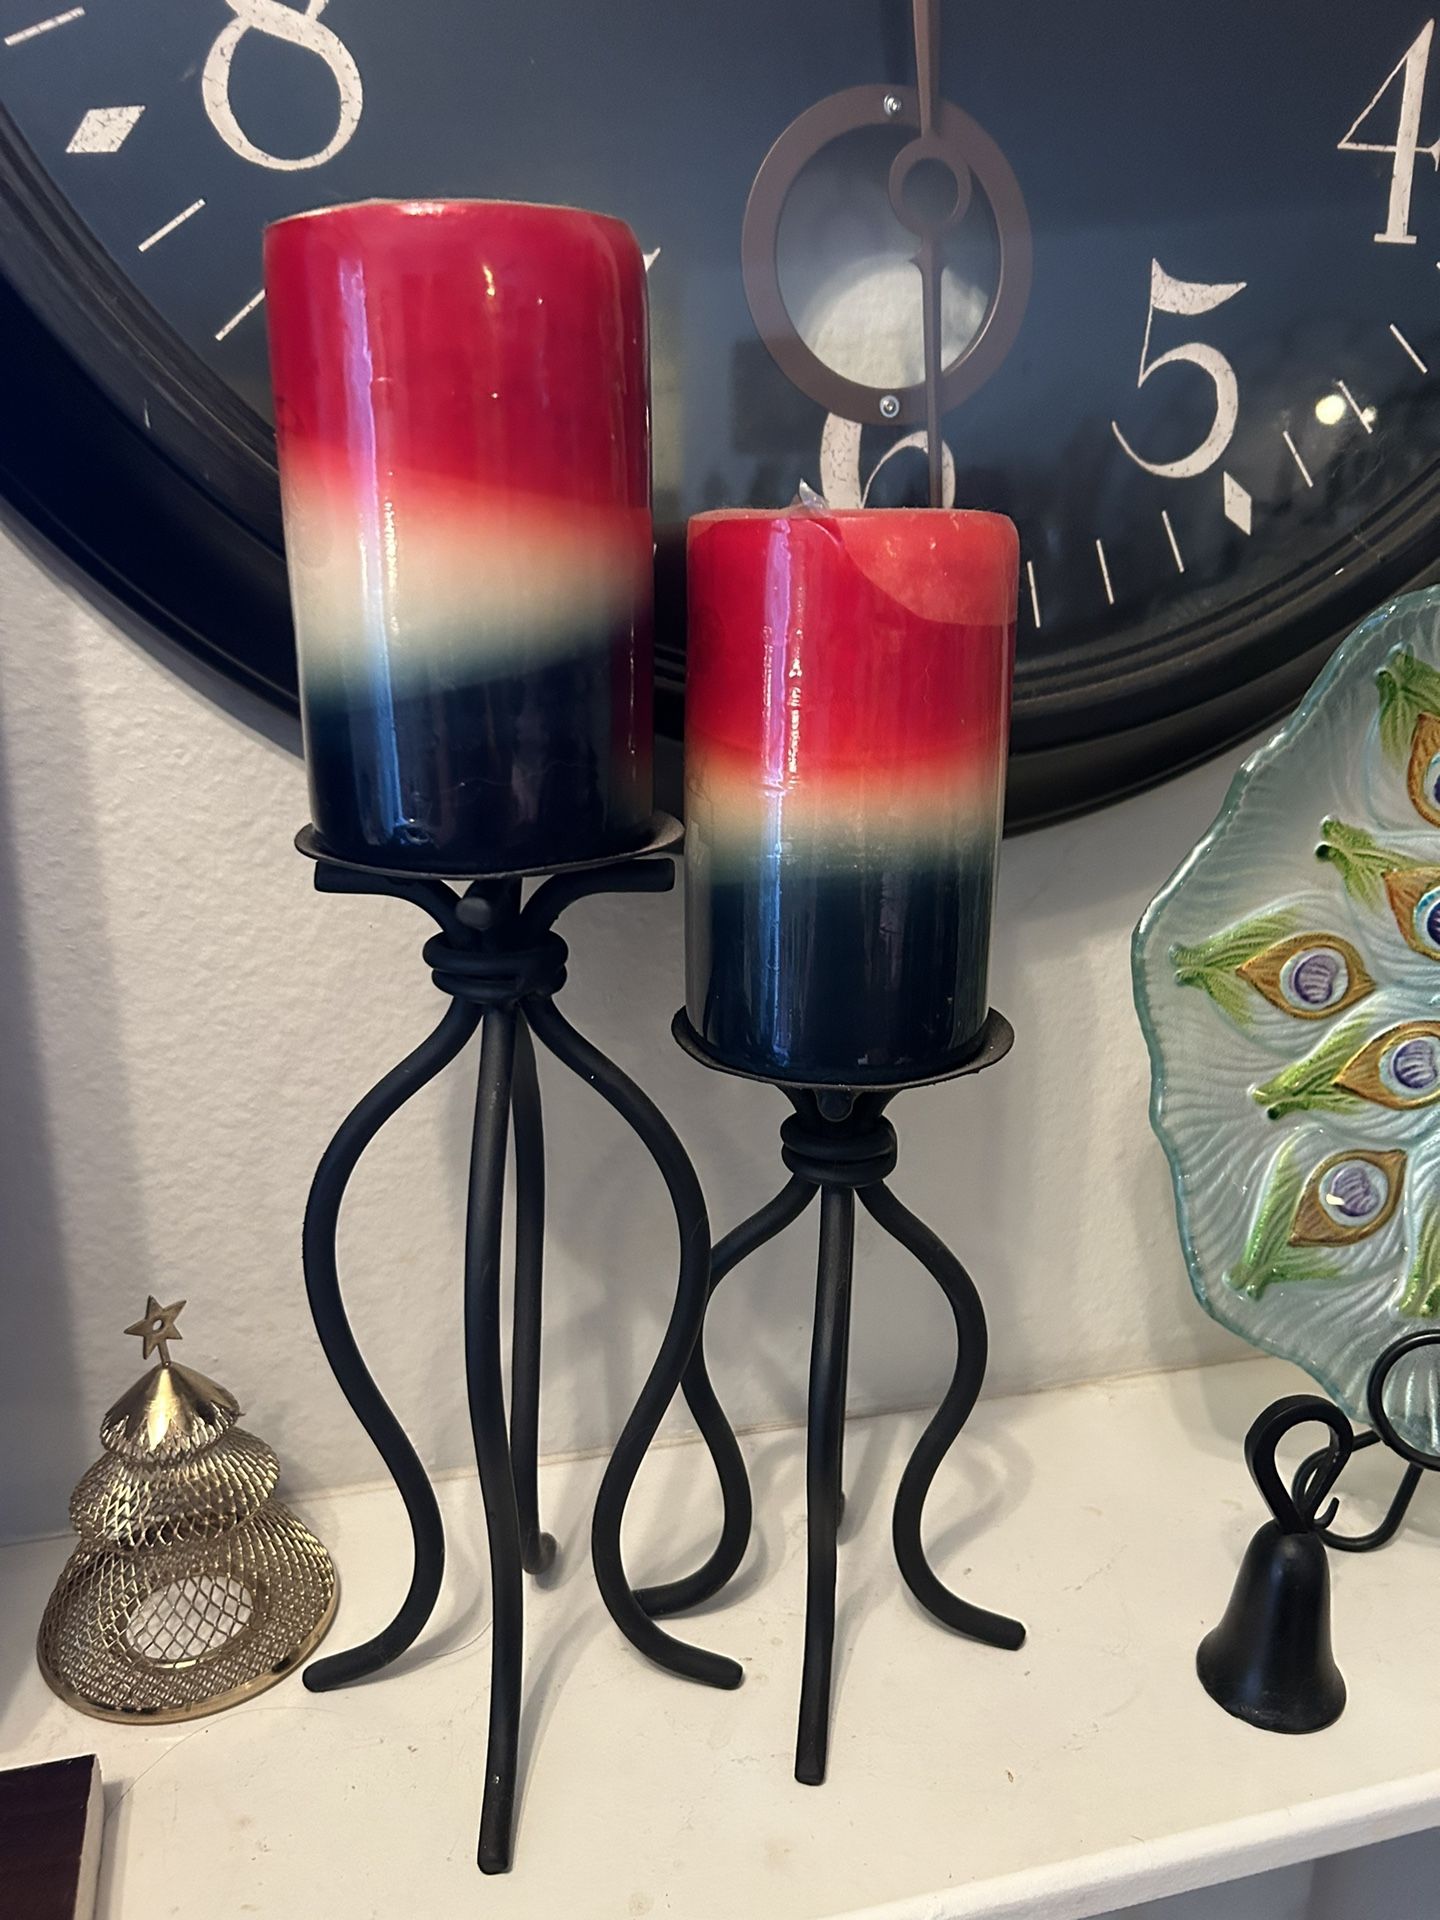 12” And 14” High 4th Of July Candles/Holders